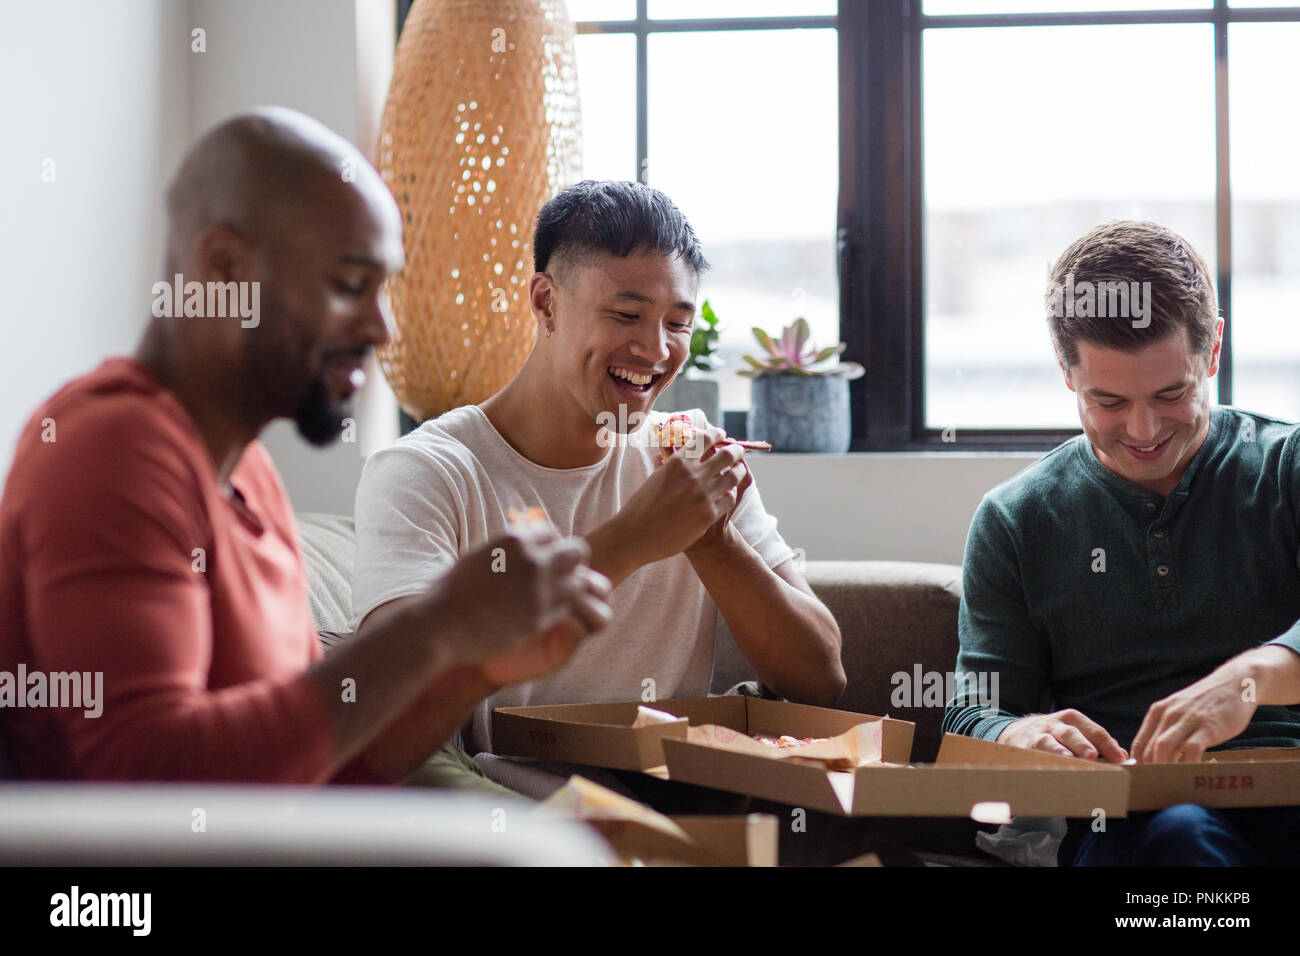 Male friends eating takeout pizza in an apartment Stock Photo